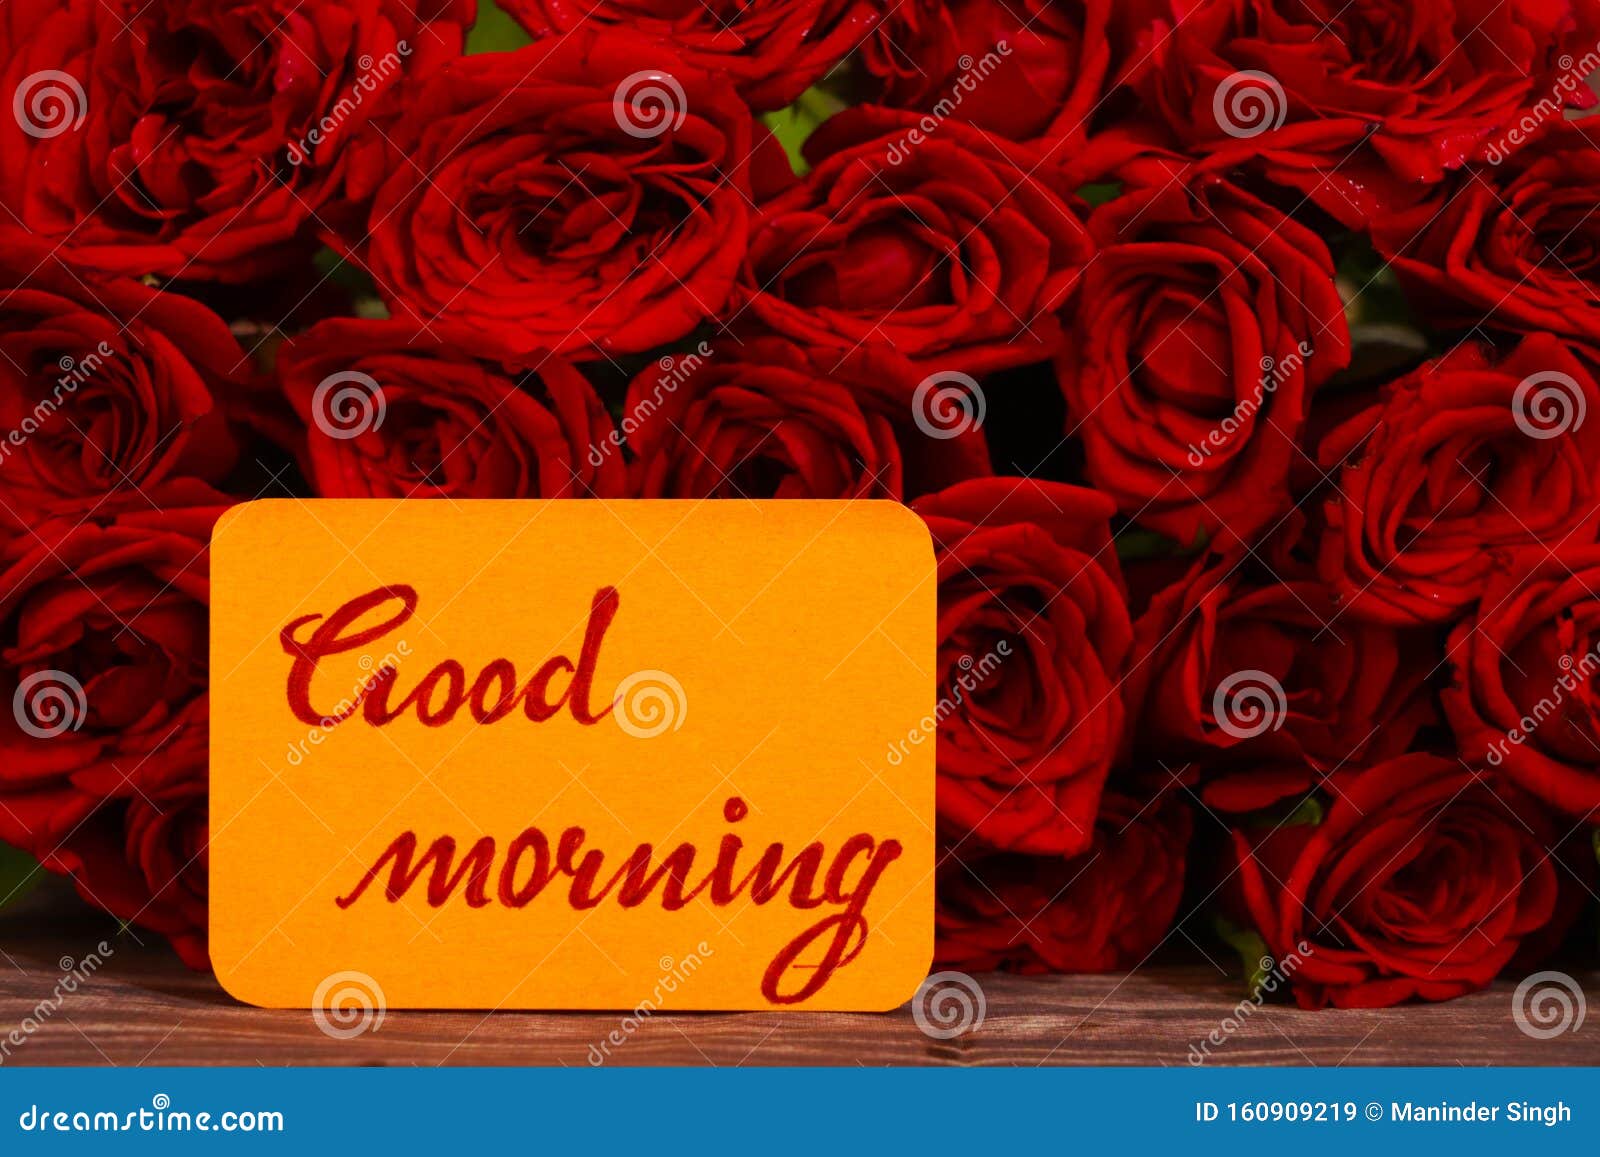 Good Morning Text with Red Roses in a Bunch As a Background. Stock ...